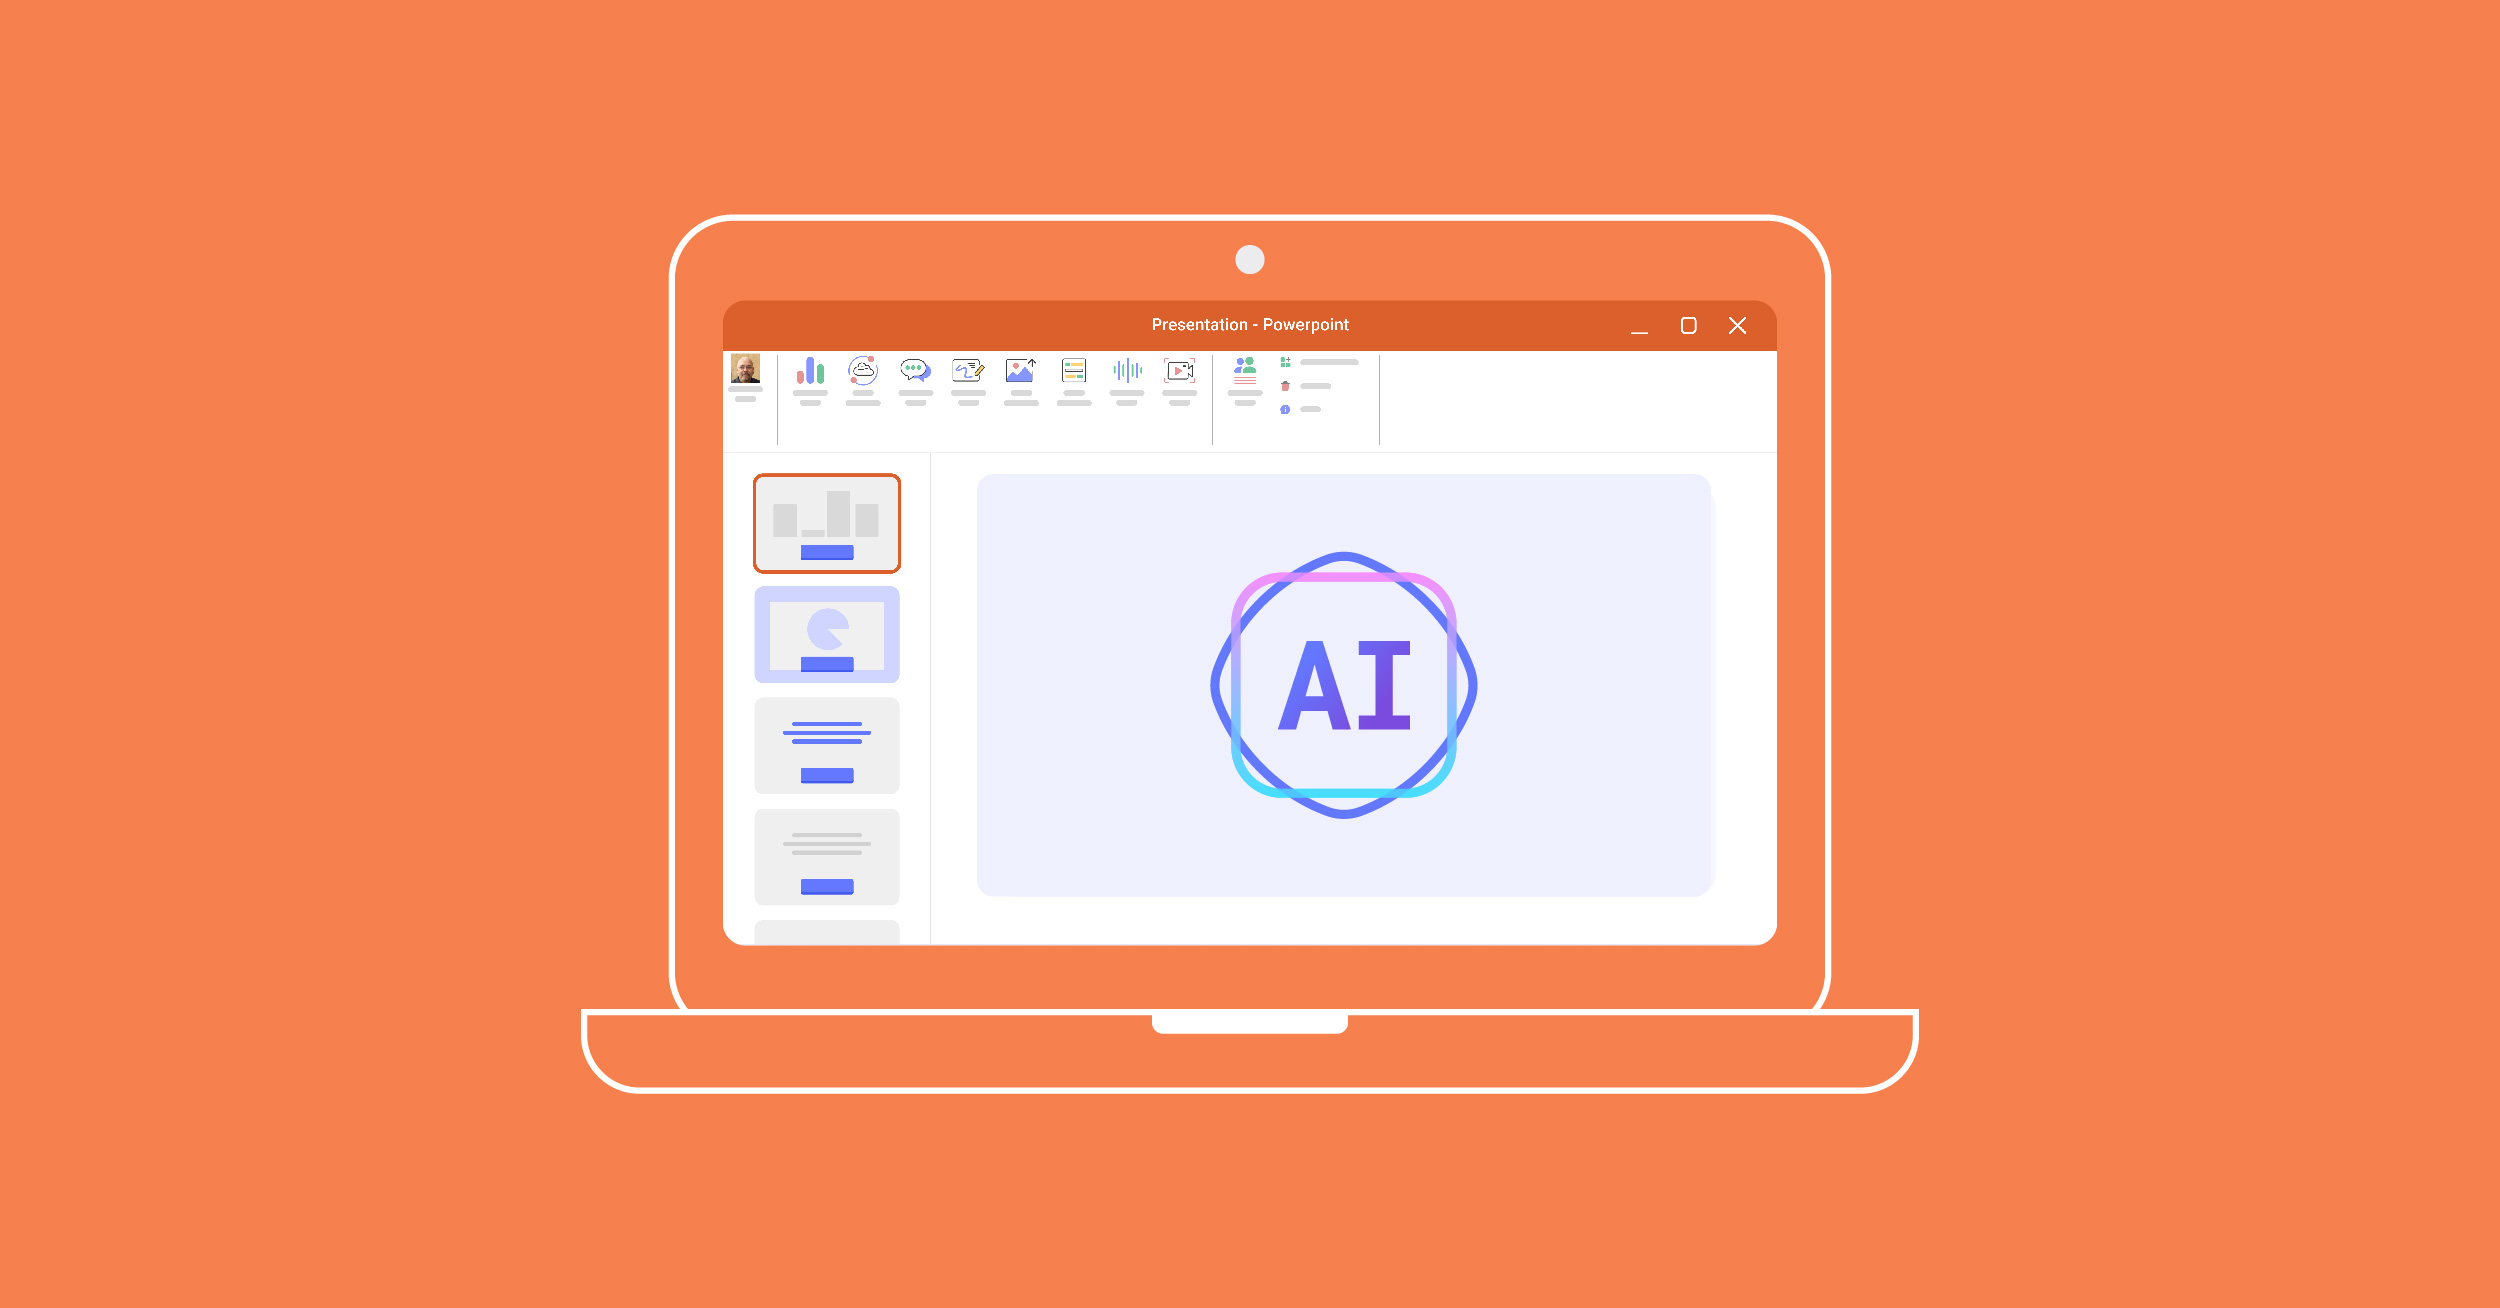 Maximize Your Presentation Potential: 8 Ways to Use AI in PowerPoint